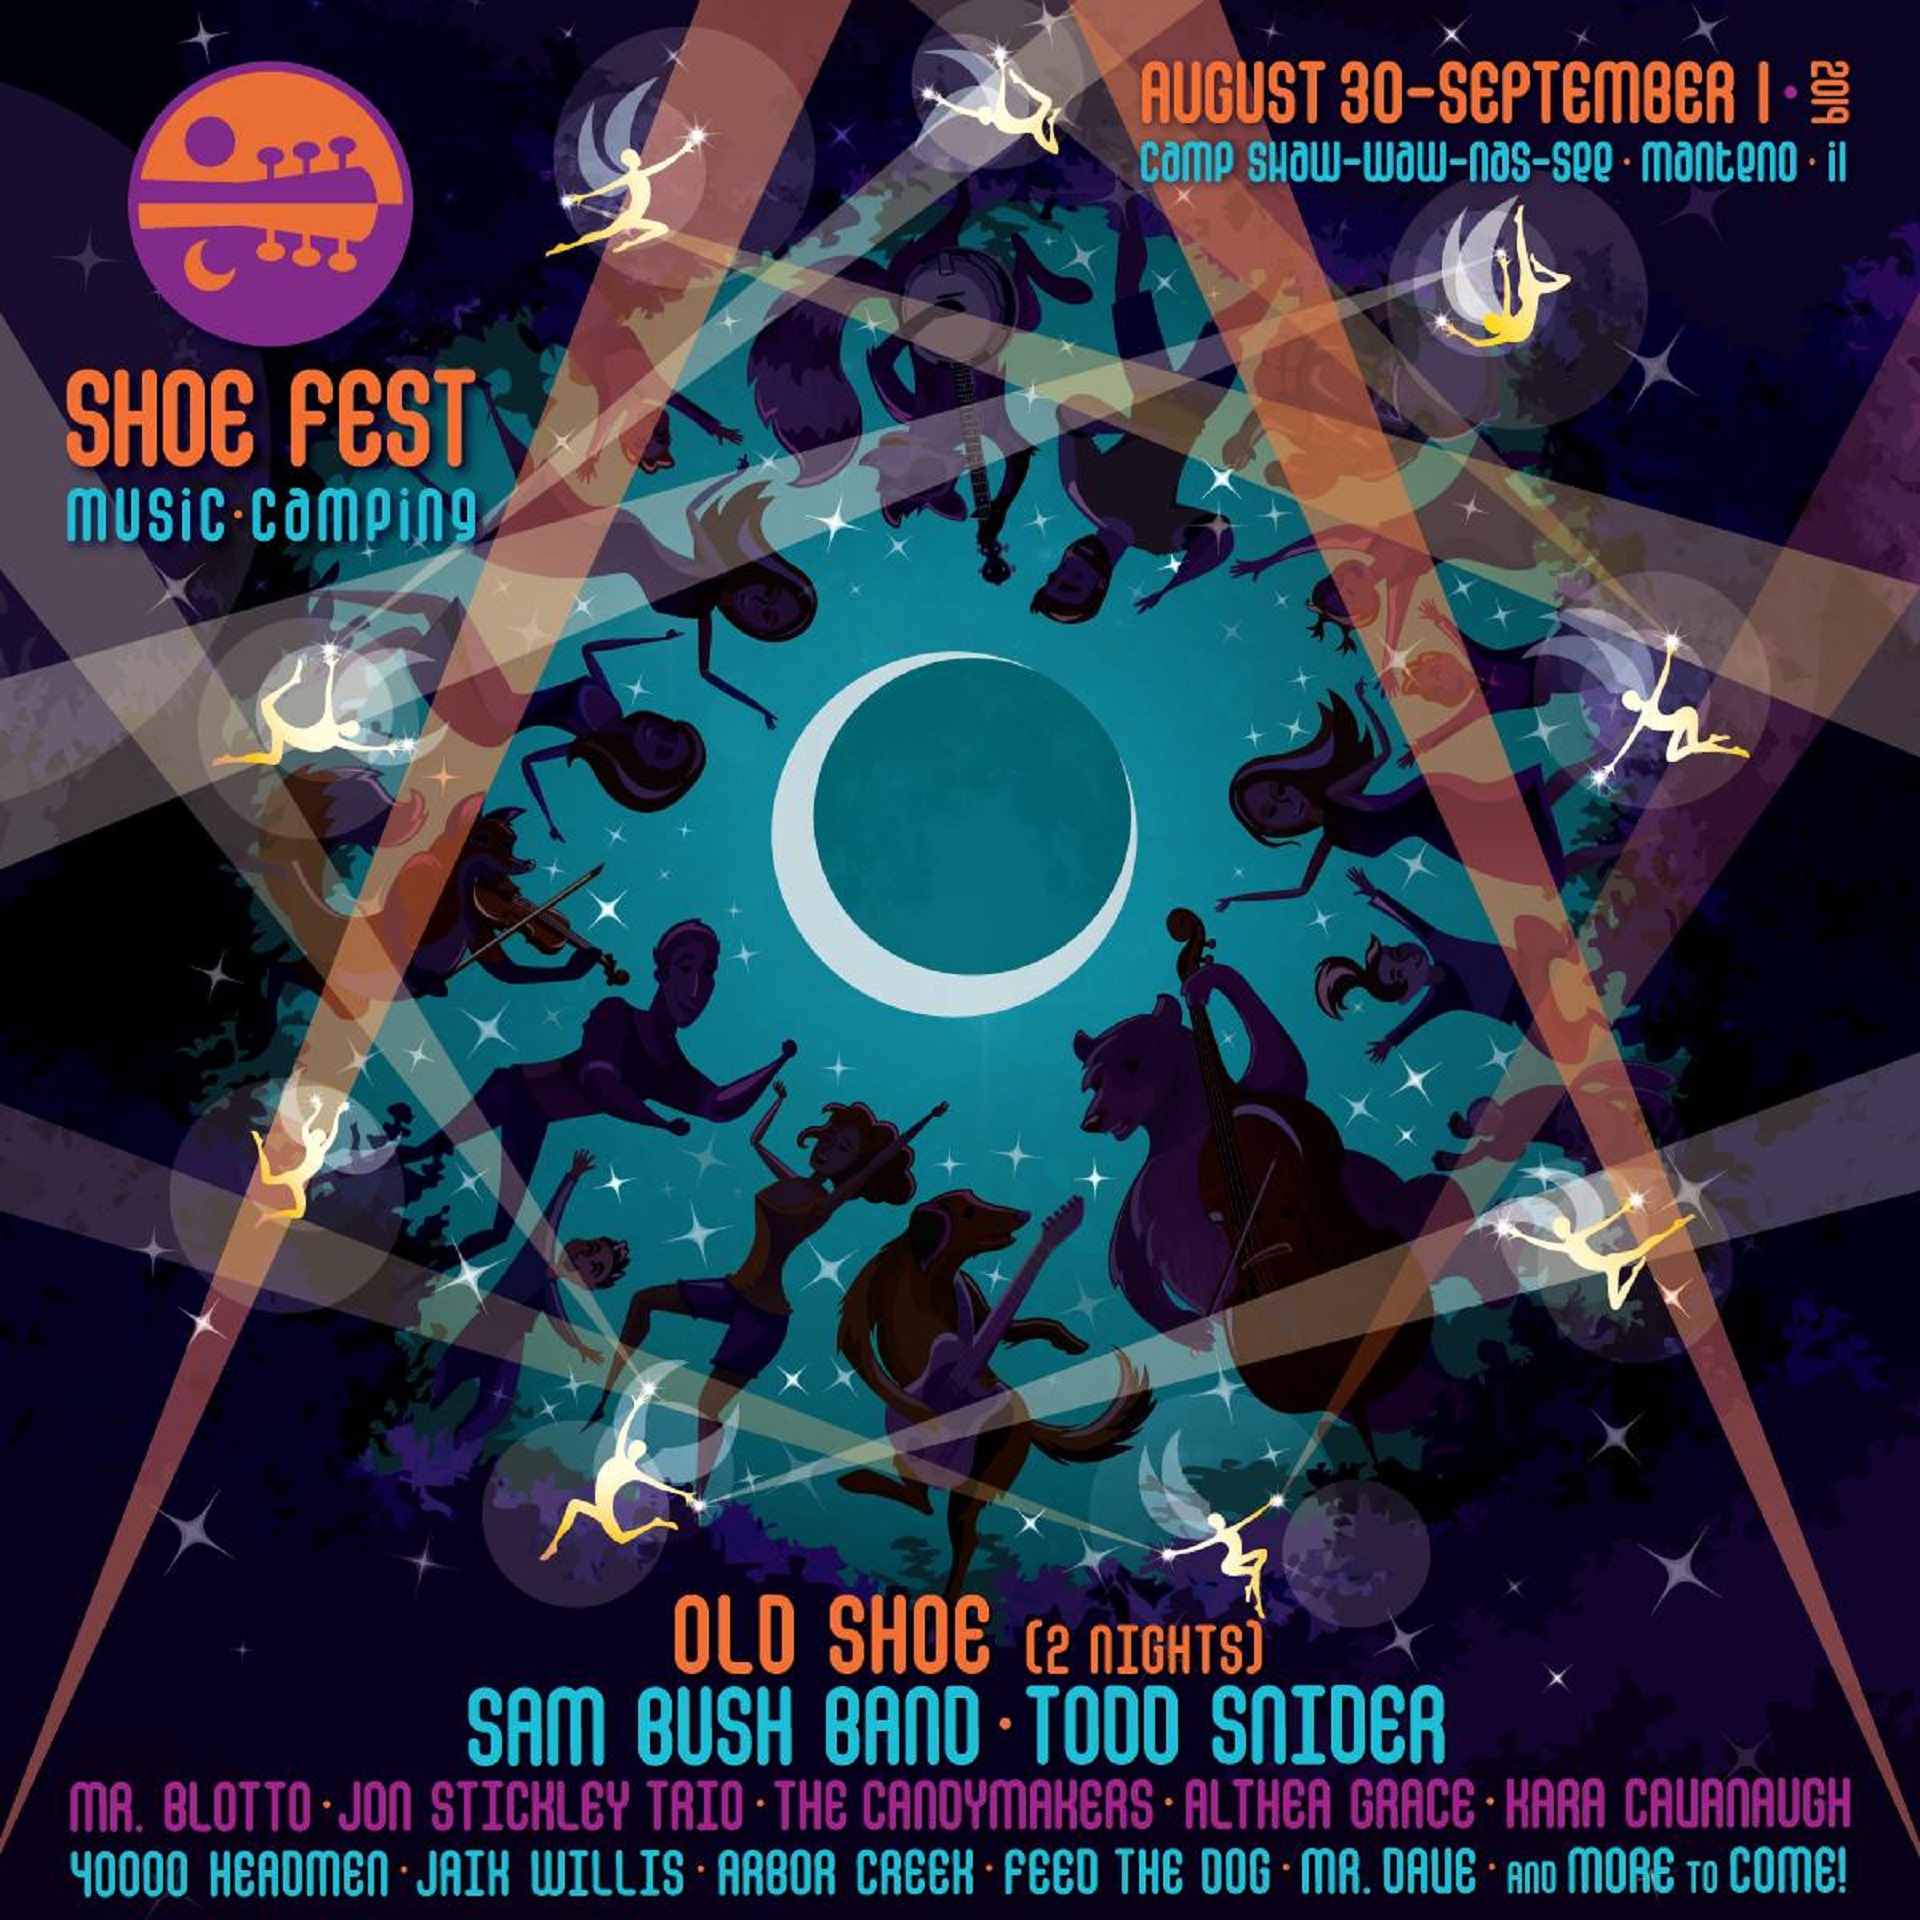 Shoe Fest announces first round lineup with Sam Bush and Todd Snider